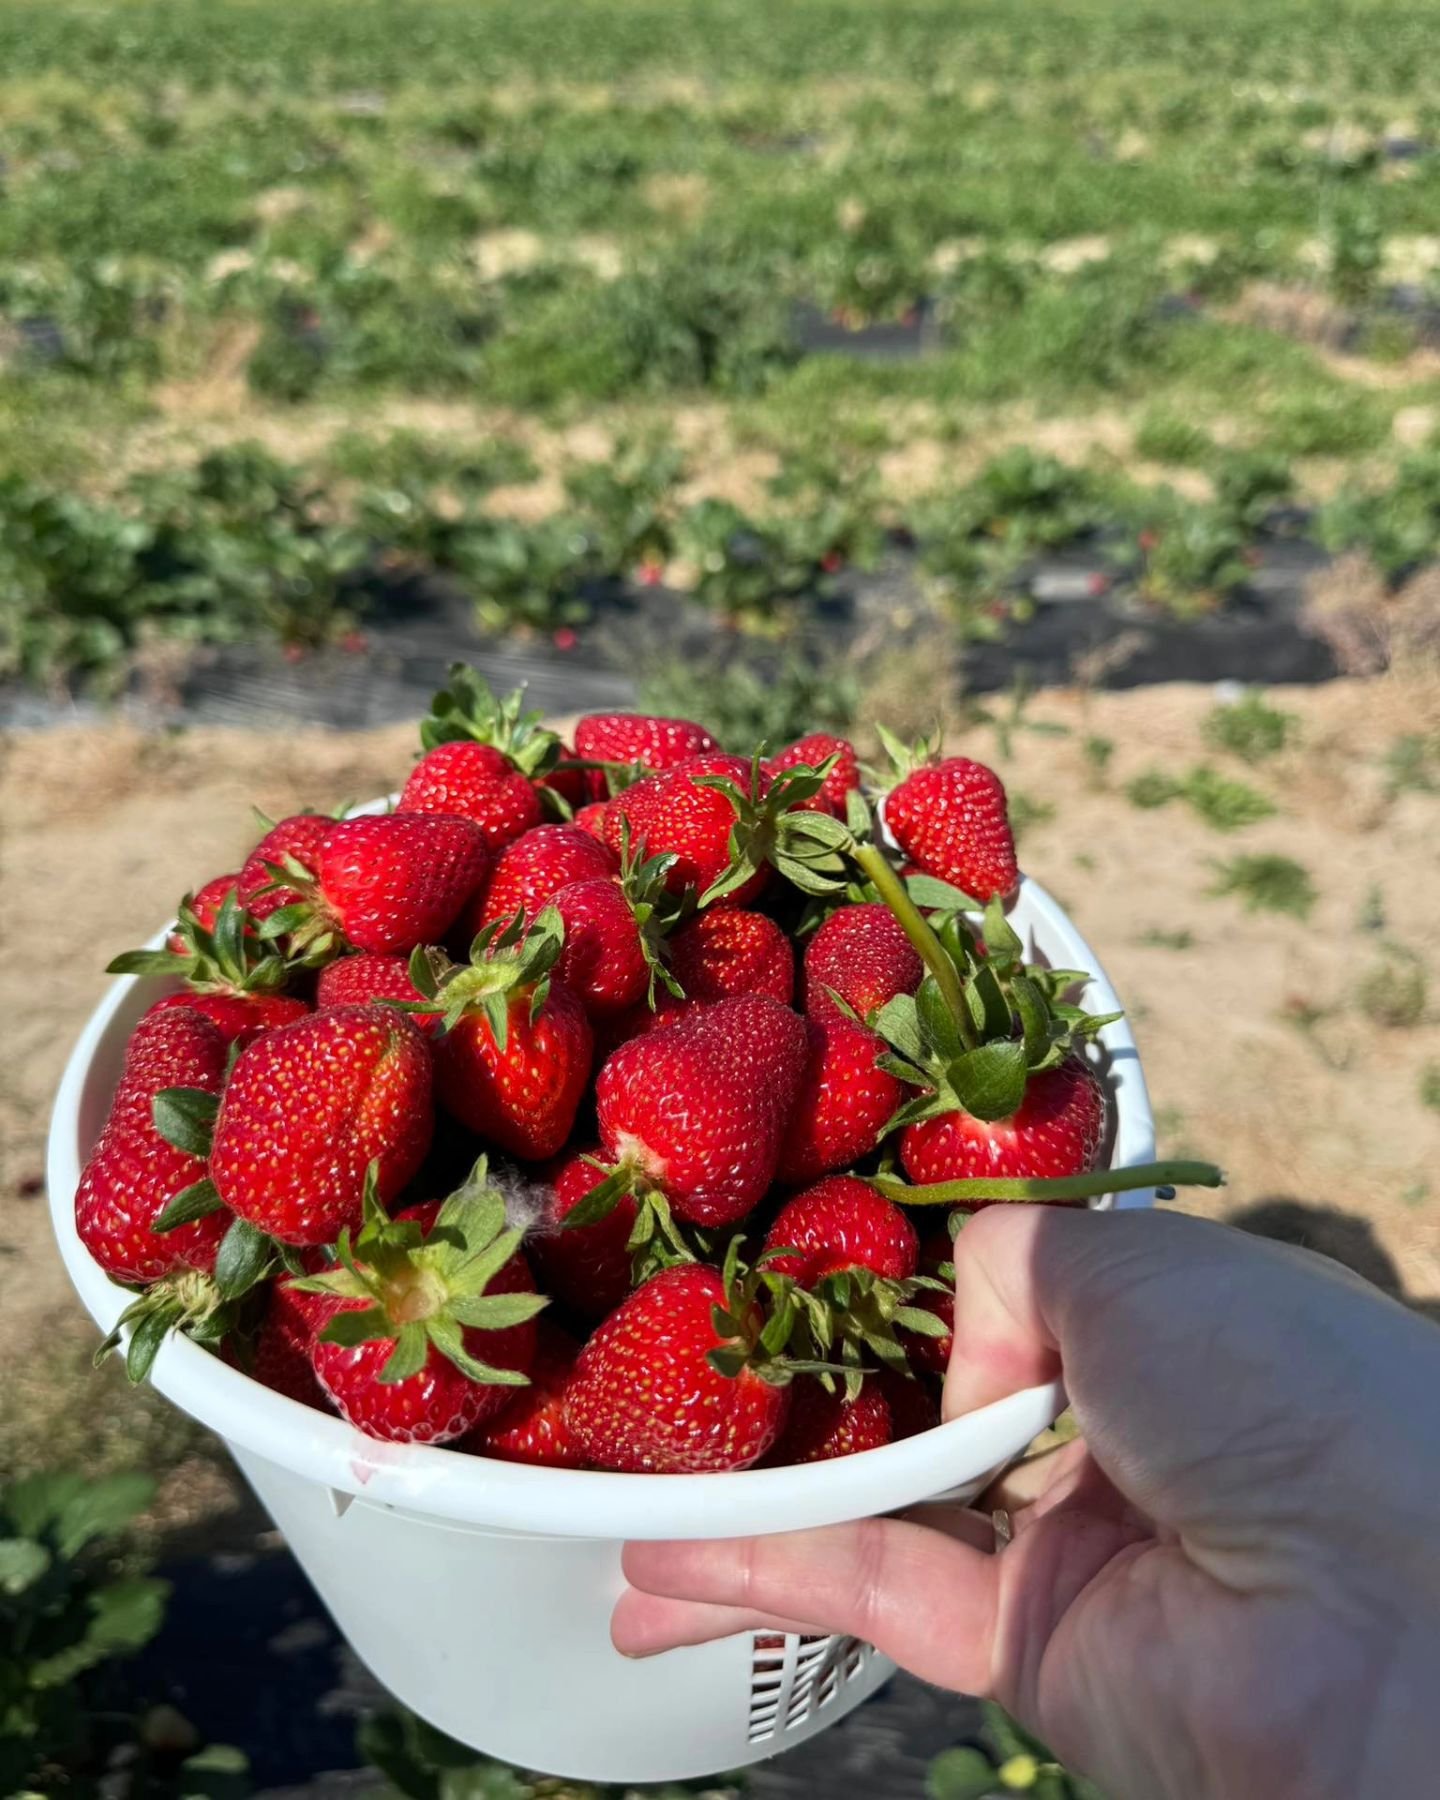 🧨🪣 SALE 🧨🪣 Roadside Market Only. 
🍓🍓While this BULK of Berries LAST 🍓🍓
PURCHASE at the market or &quot;PICK YOUR OWN&quot; a full Bucket of Strawberries and get the second one HALF OFF! 
Due to the weekend weather, take advantage of the seaso